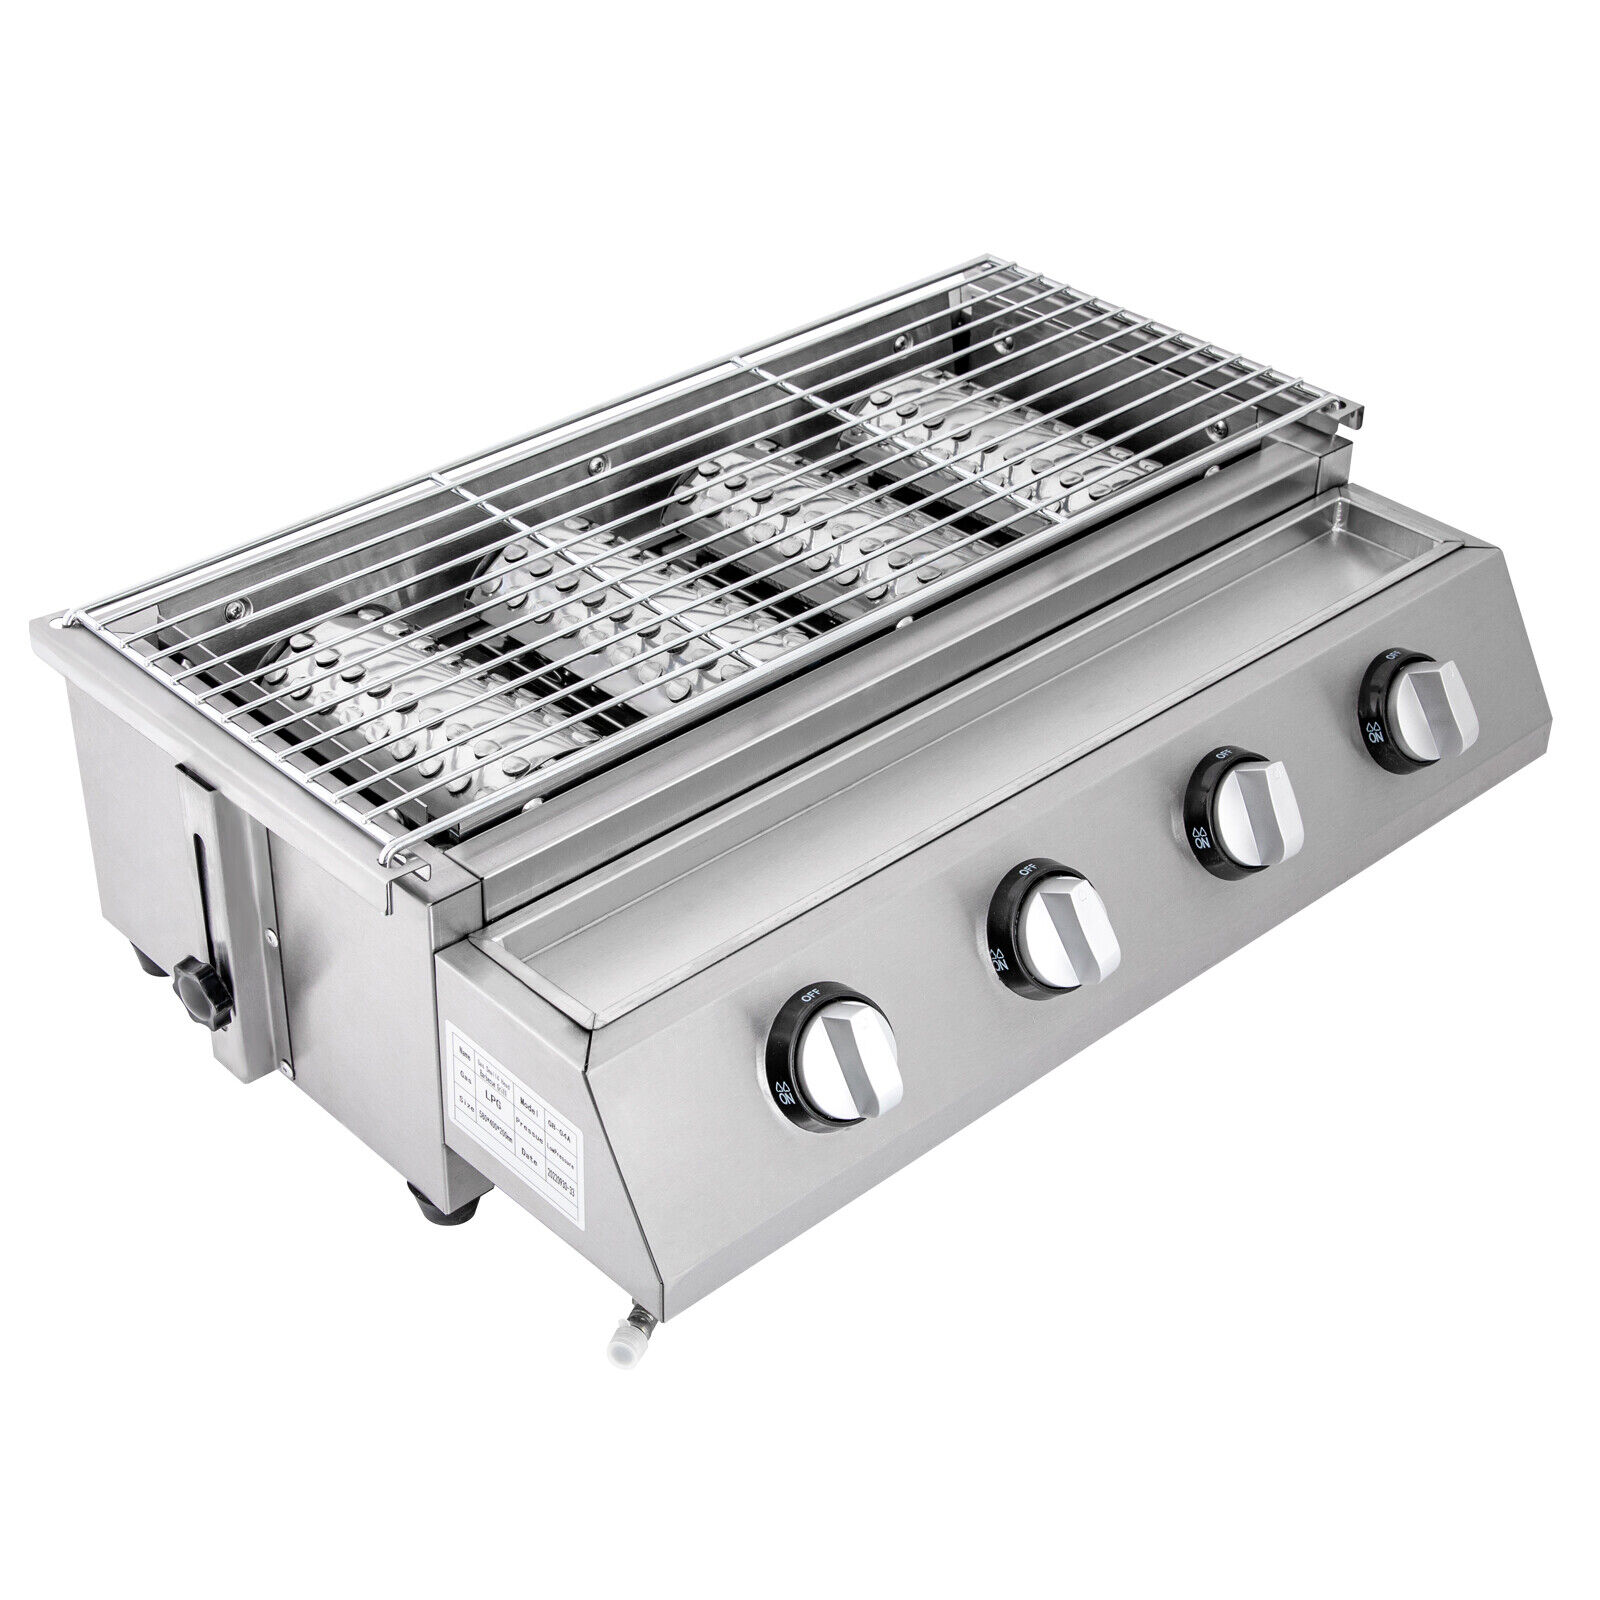 Miumaeov 4-Burner BBQ Propane Gas Grill 21.9 Inch Stainless Steel Barbecue Camping Grill Portable Small Propane Grill Detachable BBQ Gas Grill Griddle Silver Patio Smokeless Grill with Steel Hood - image 4 of 12